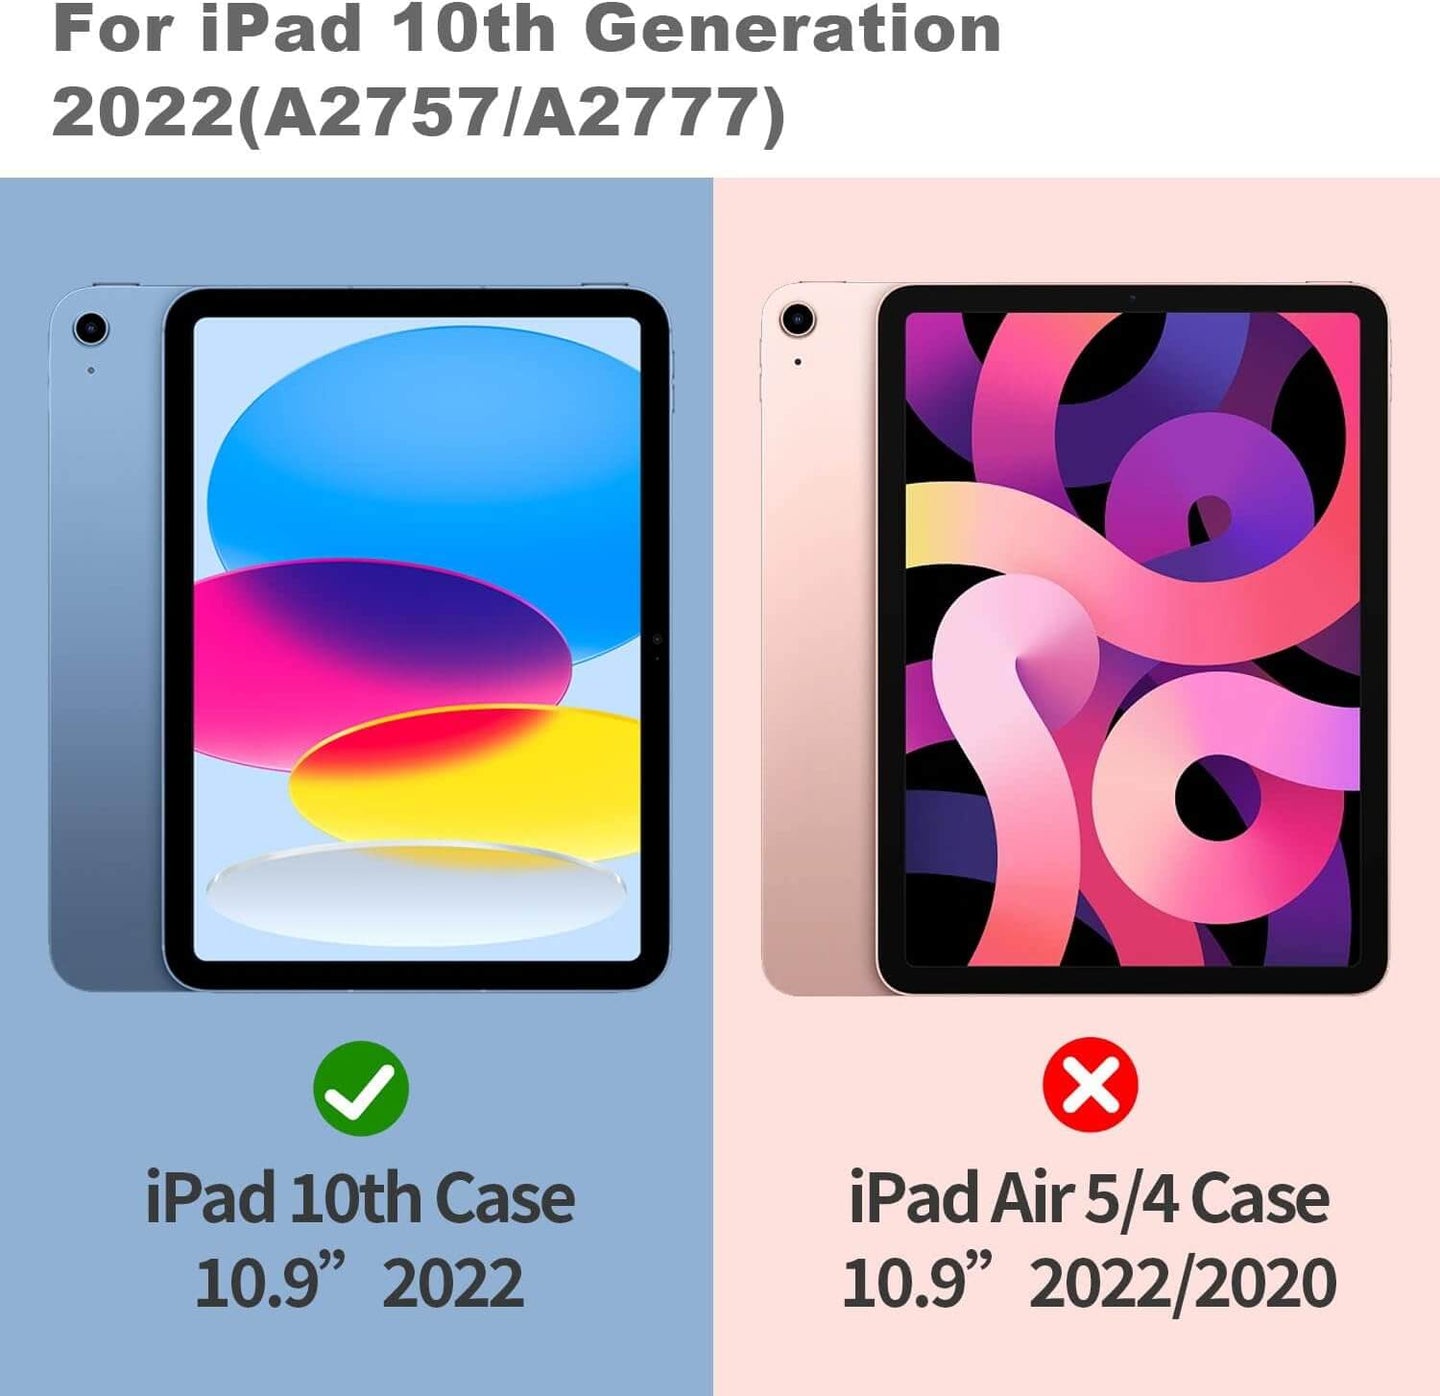 Case for iPad 10th Generation 10.9 inch